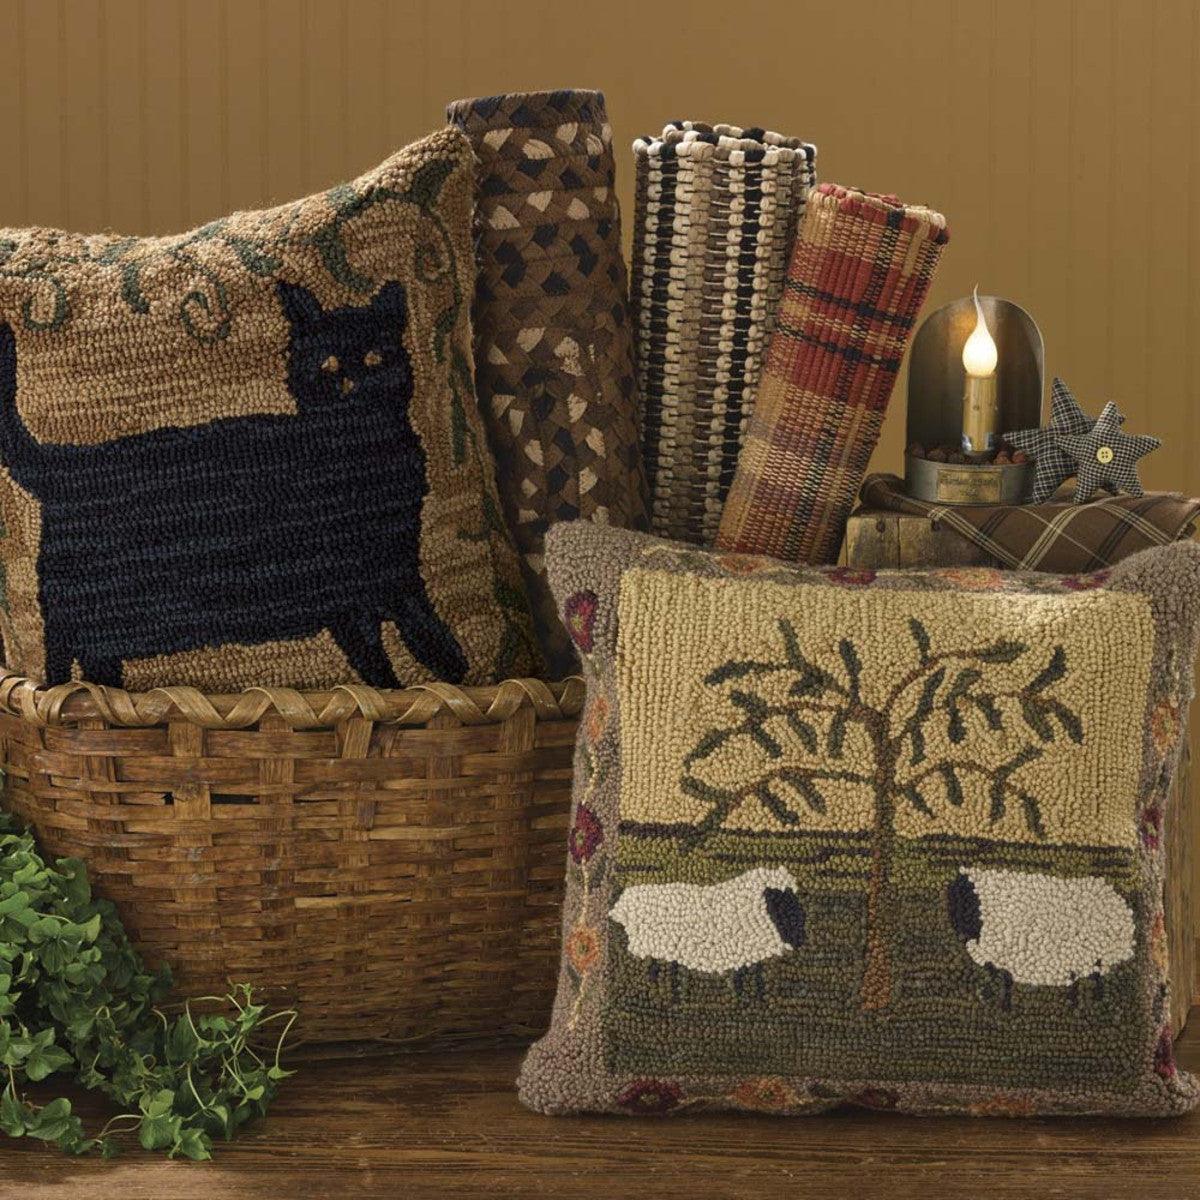 Willow & Sheep Hooked Pillow Set Down Feather Fill 18"x18" - Park Designs - The Fox Decor